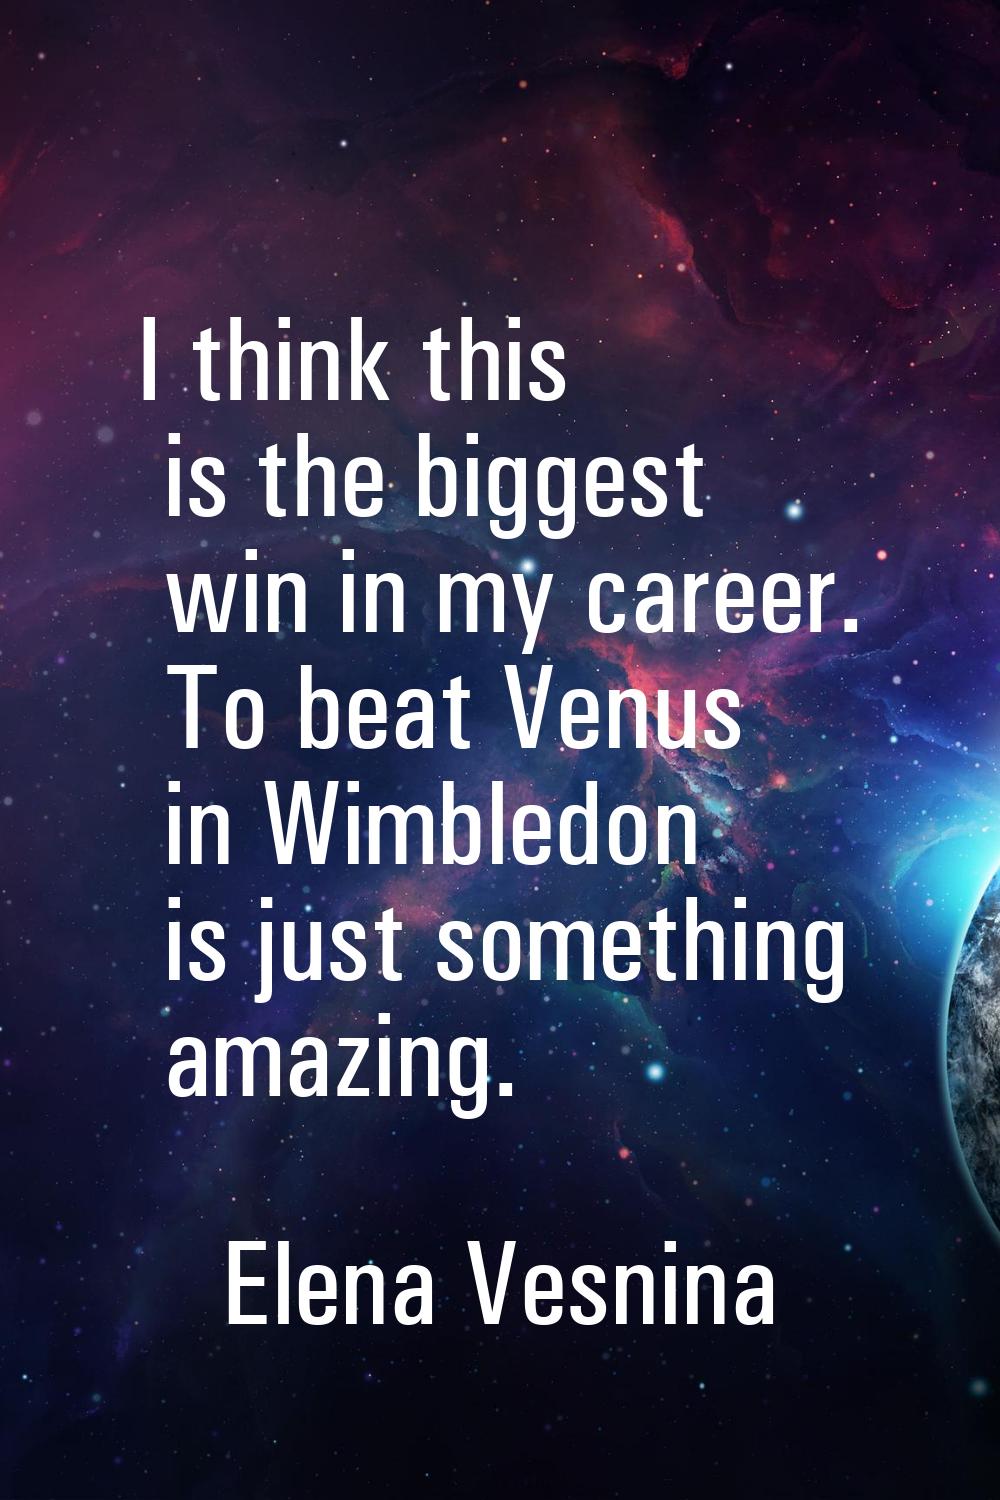 I think this is the biggest win in my career. To beat Venus in Wimbledon is just something amazing.